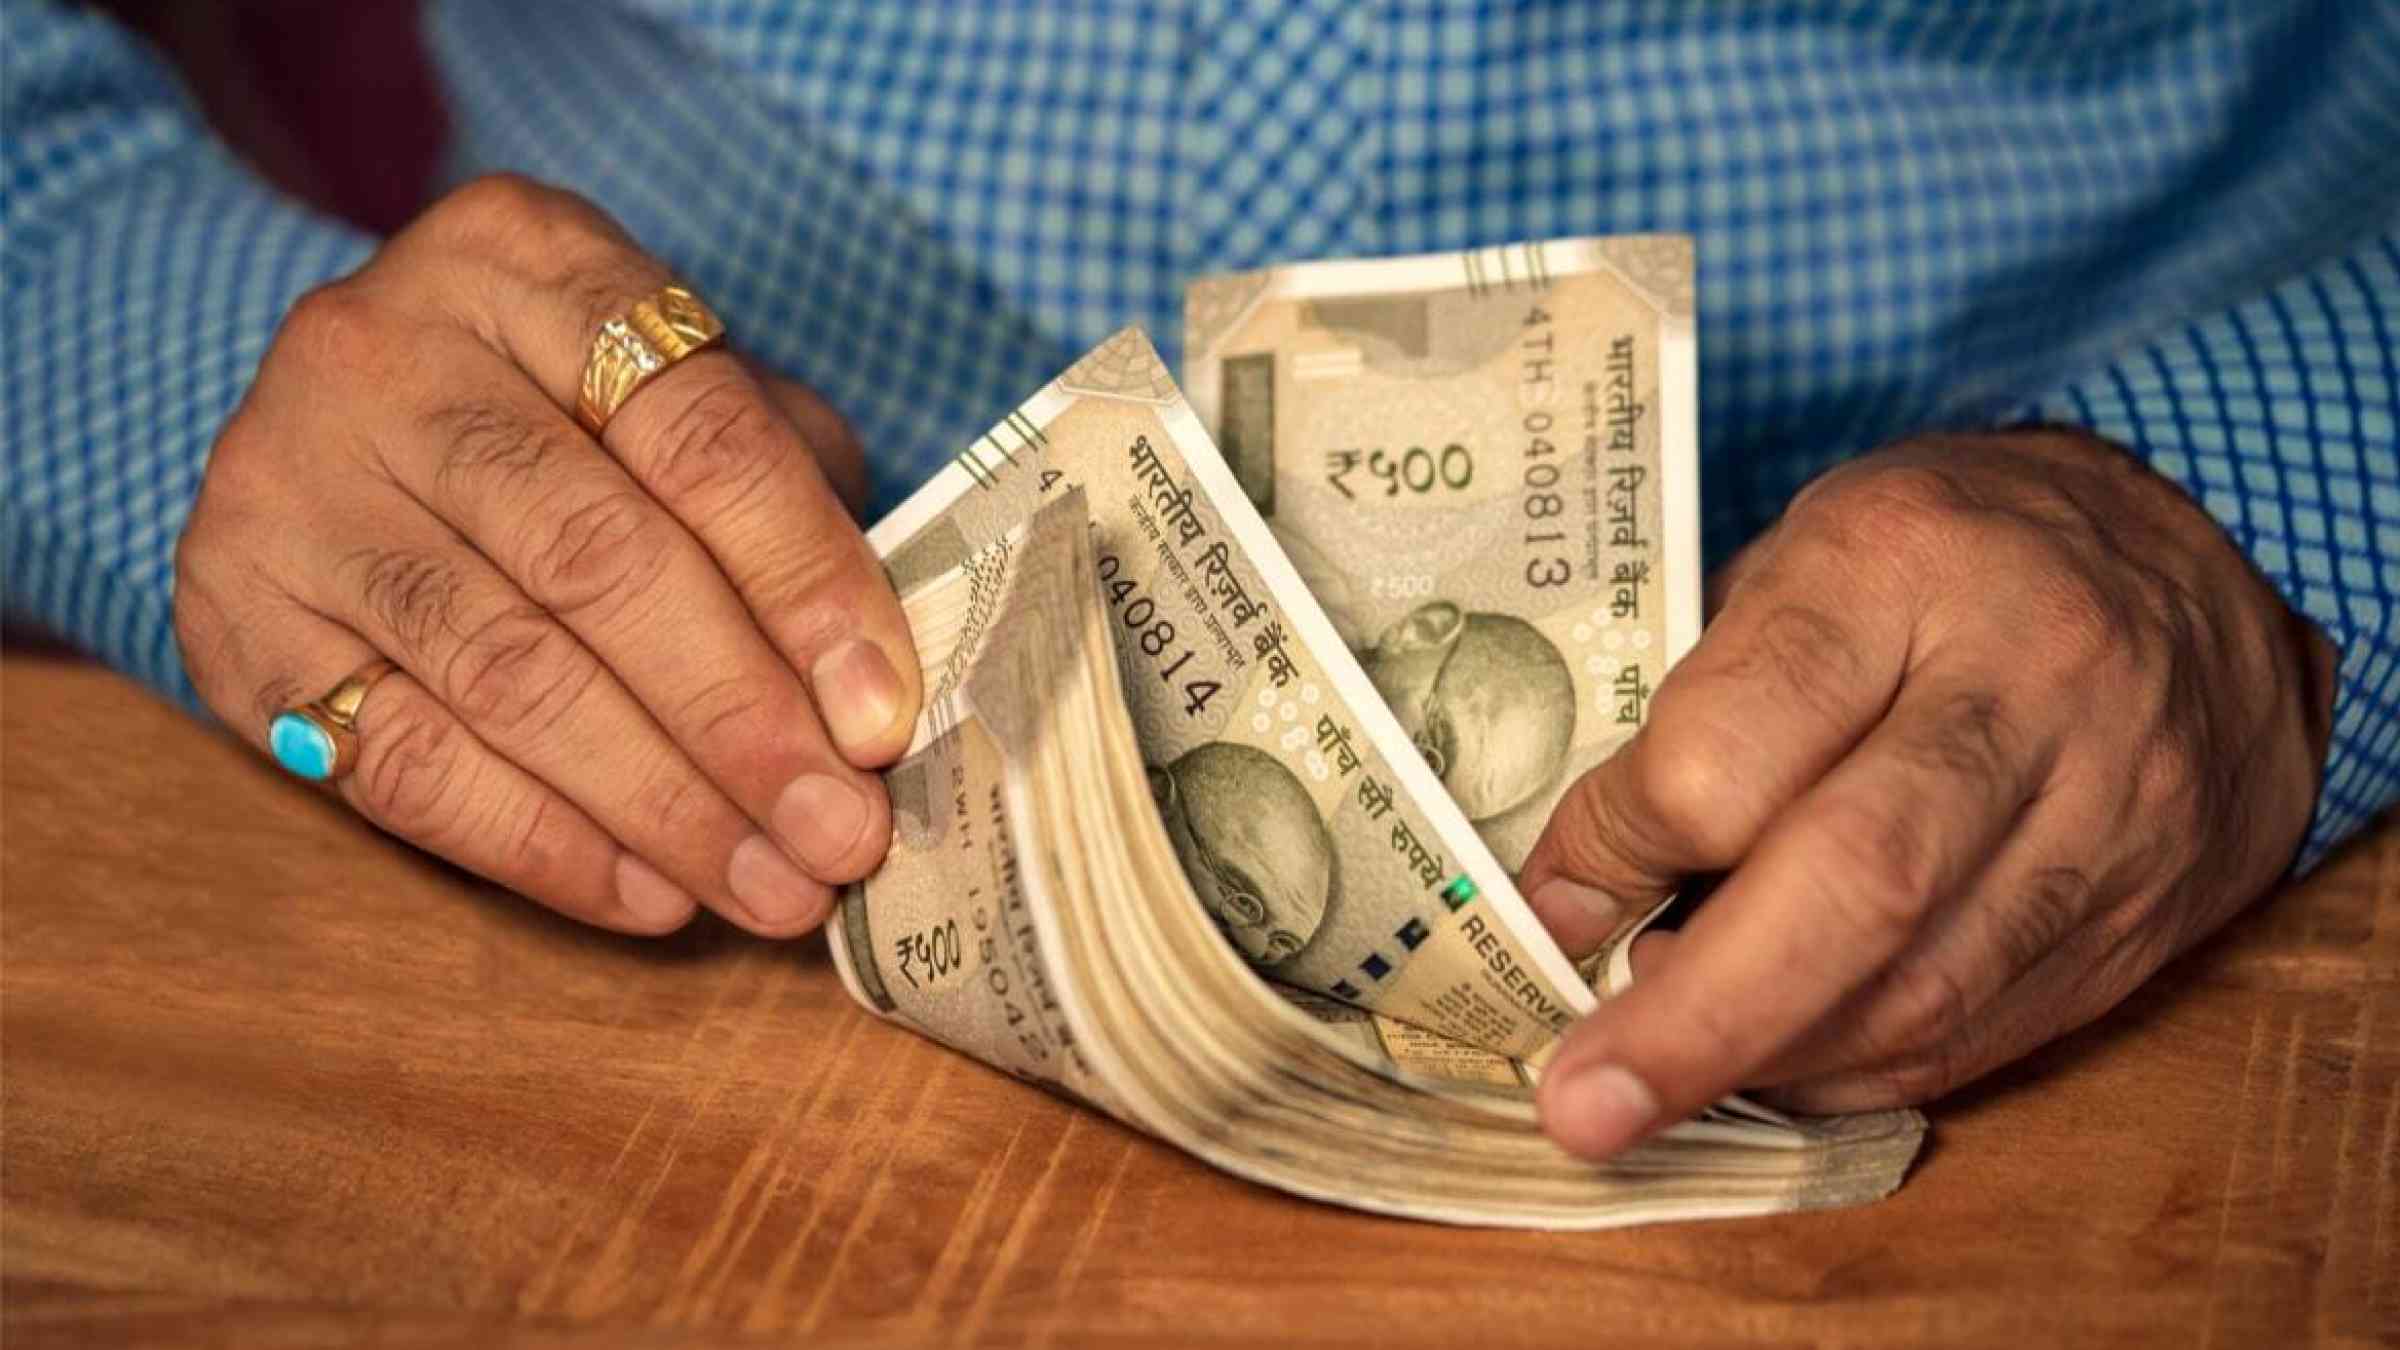 An Indian man counts a stack of five hundred rupees on a wooden table